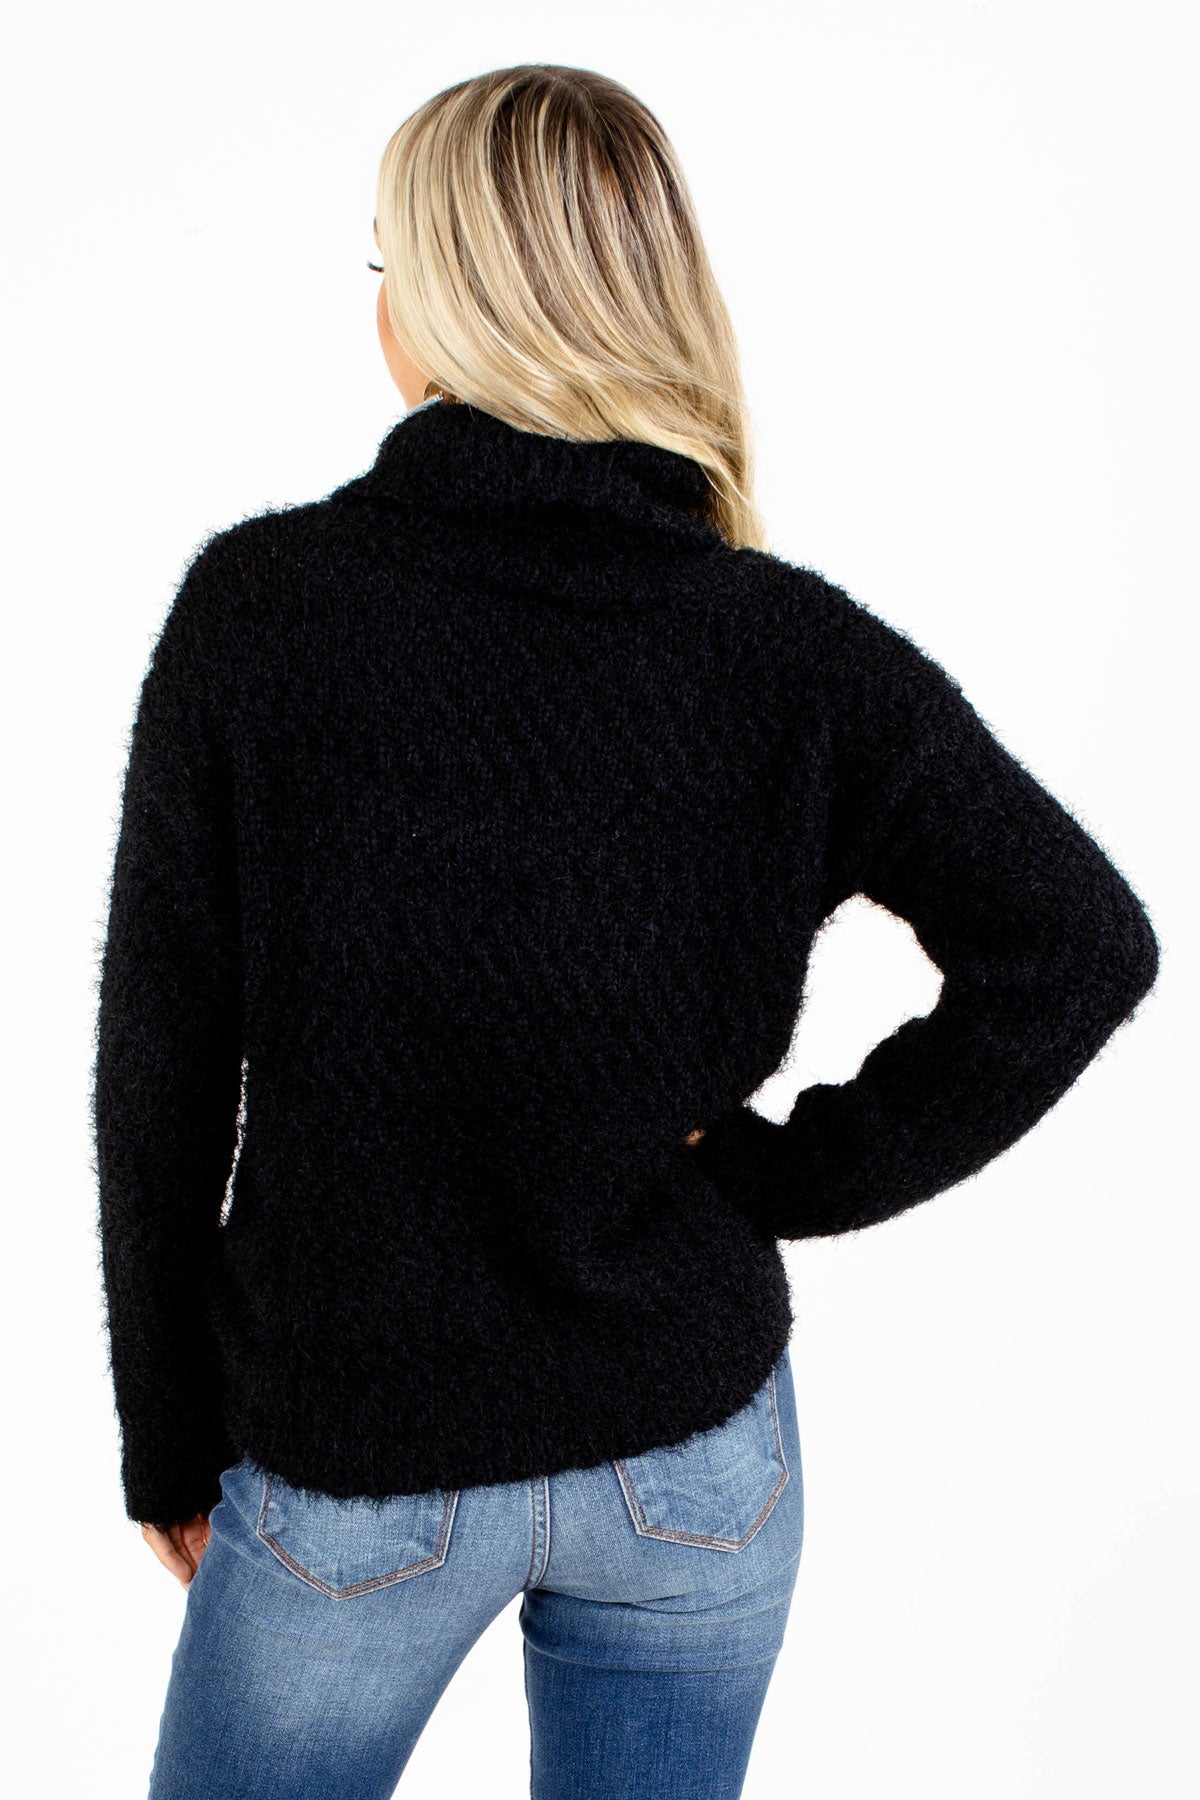 Black Cute and Comfortable Boutique Sweater for Fall